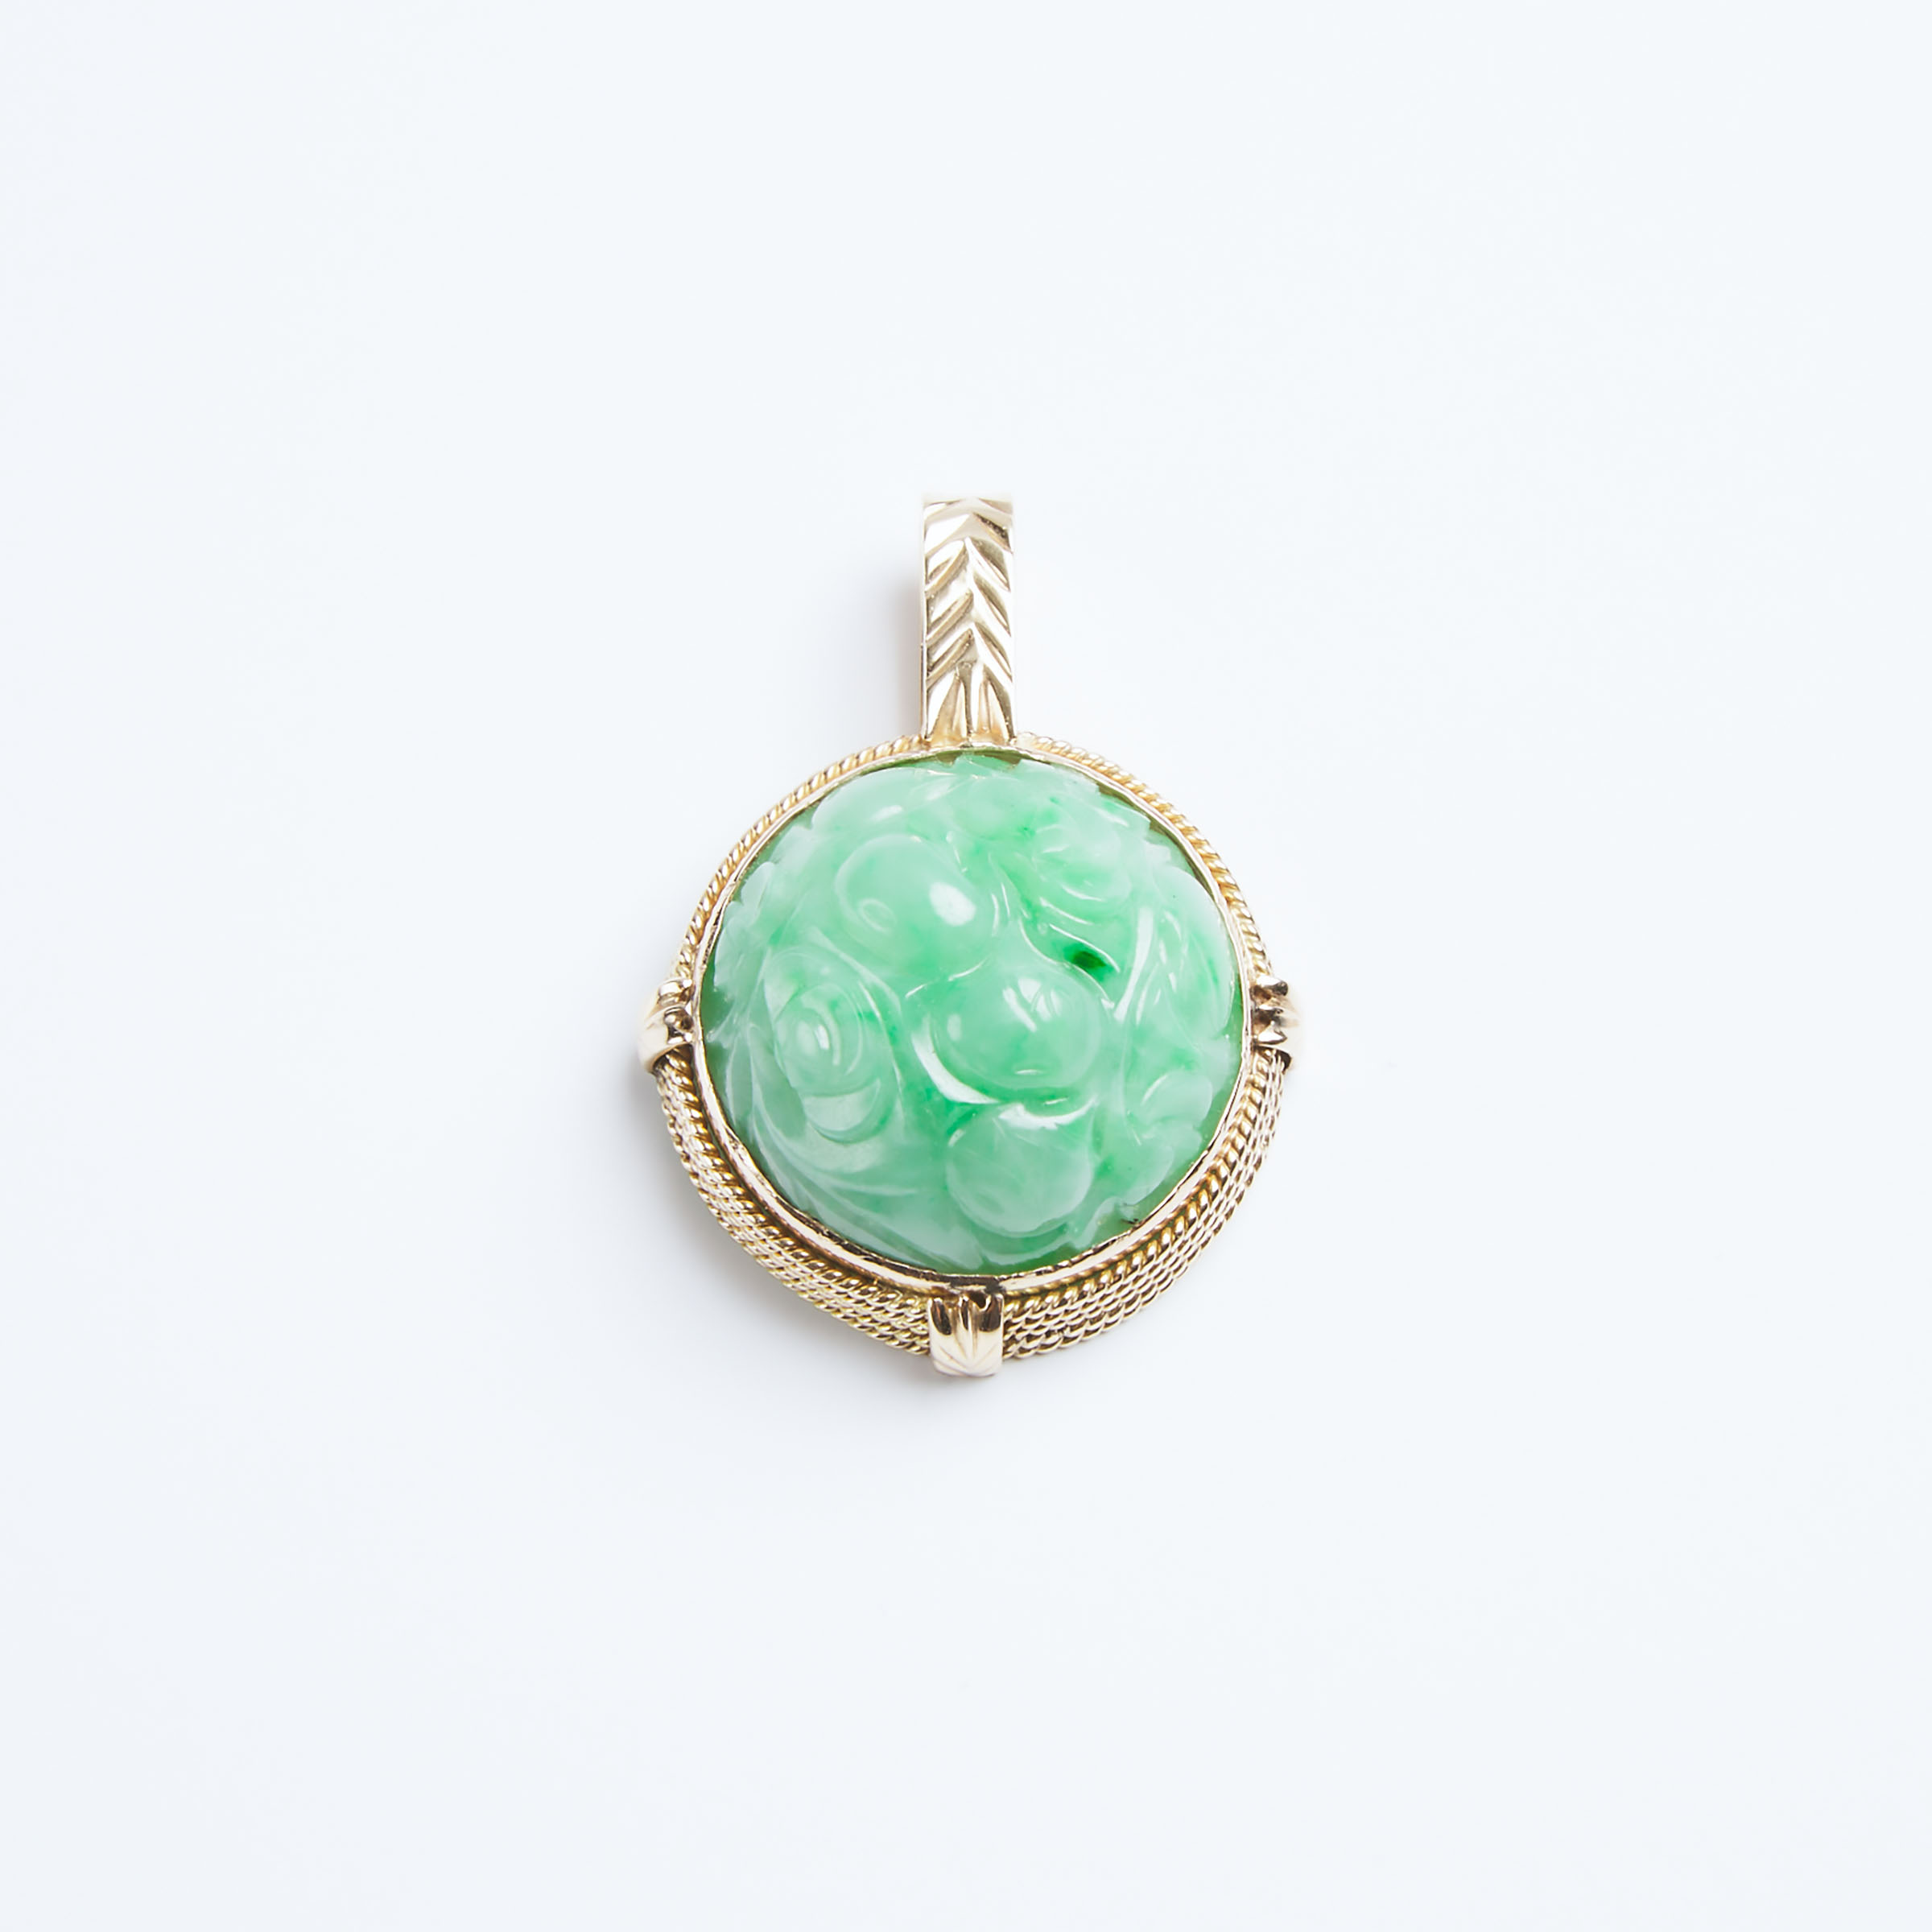 A Carved Jadeite Pendant With 14K